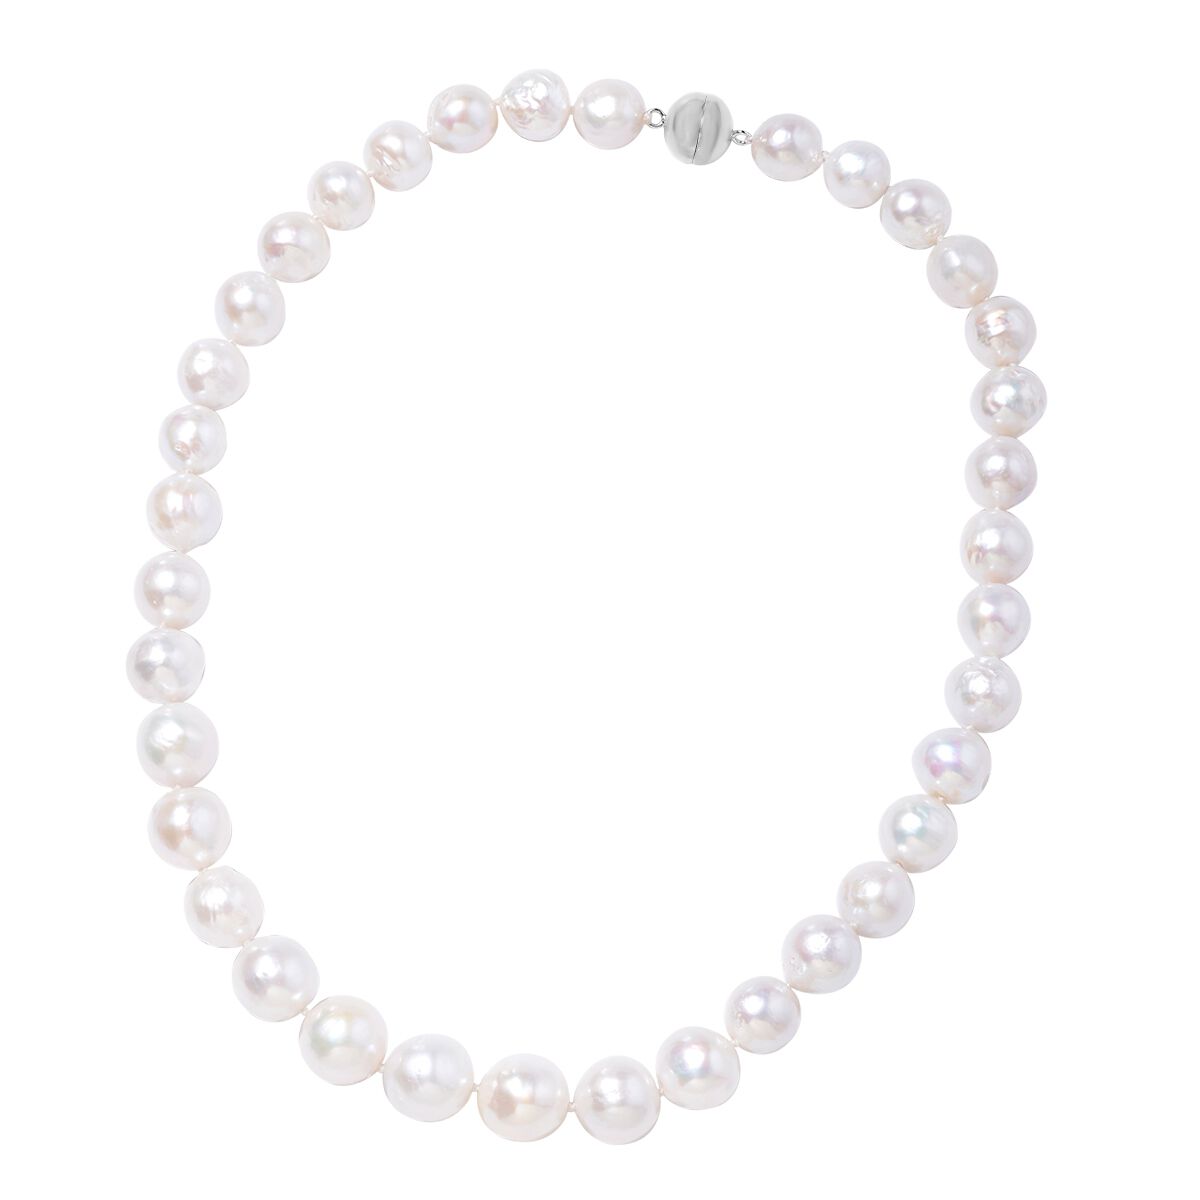 Magnetic white and pink Pearl Necklaces Faux Pearl 18" healing power magnet new